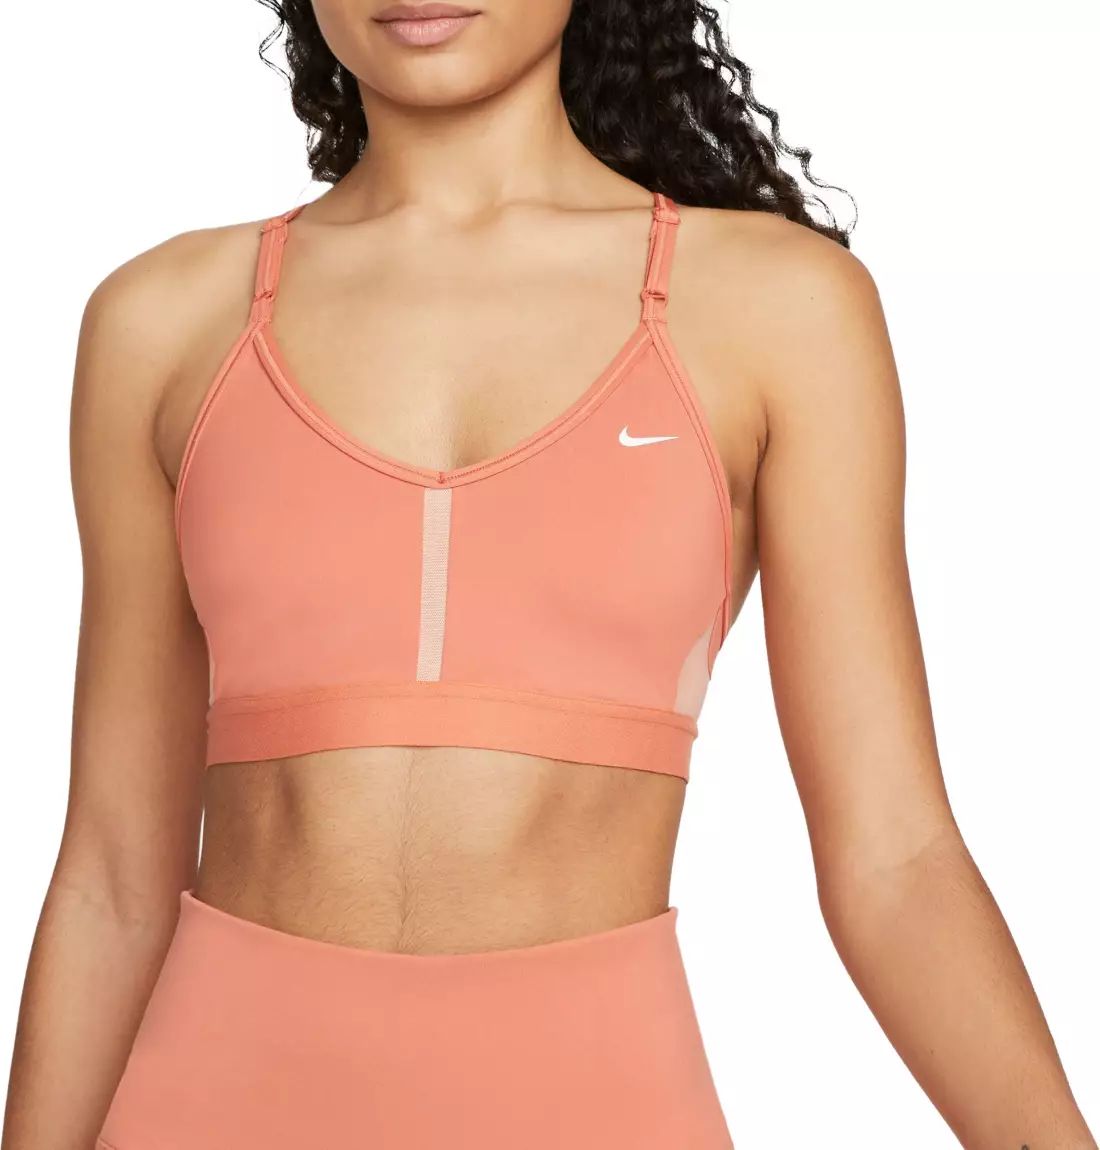 Nike Women's Dri-FIT Indy Light-Support Padded V-Neck Sports Bra | Dick's Sporting Goods | Dick's Sporting Goods